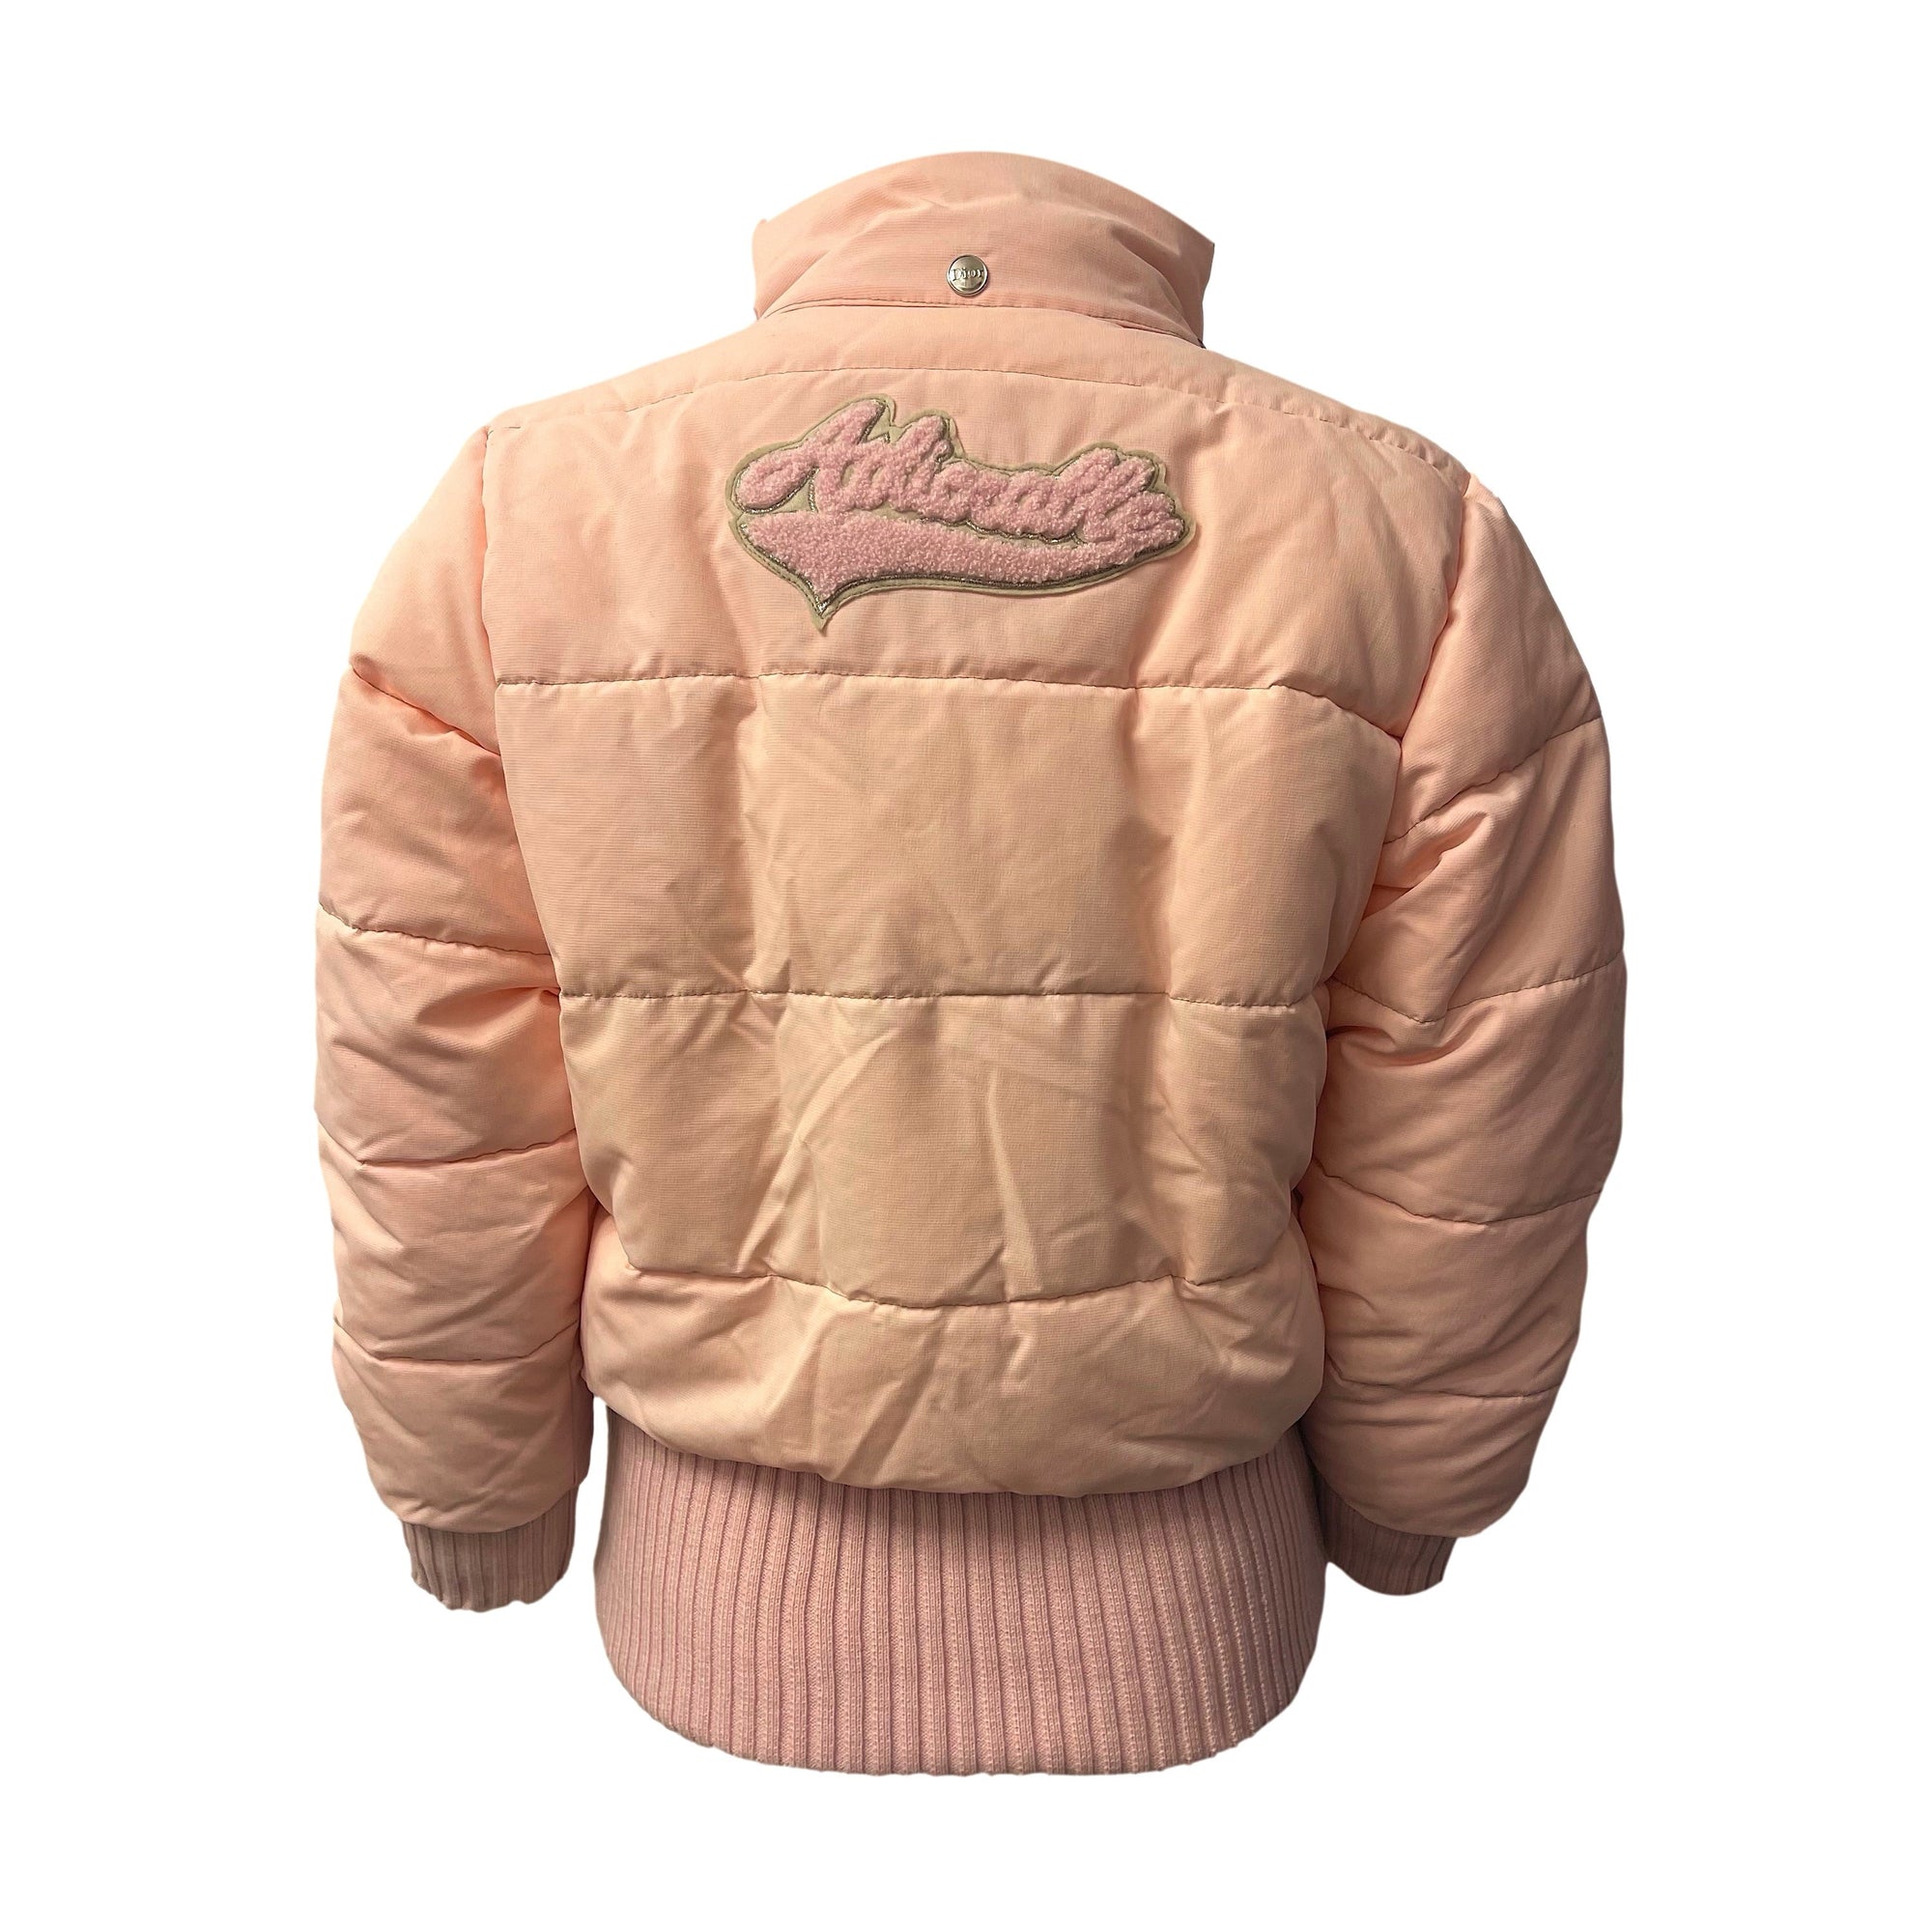 Dior Baby Pink Adiorable Puffer Jacket - Apparel